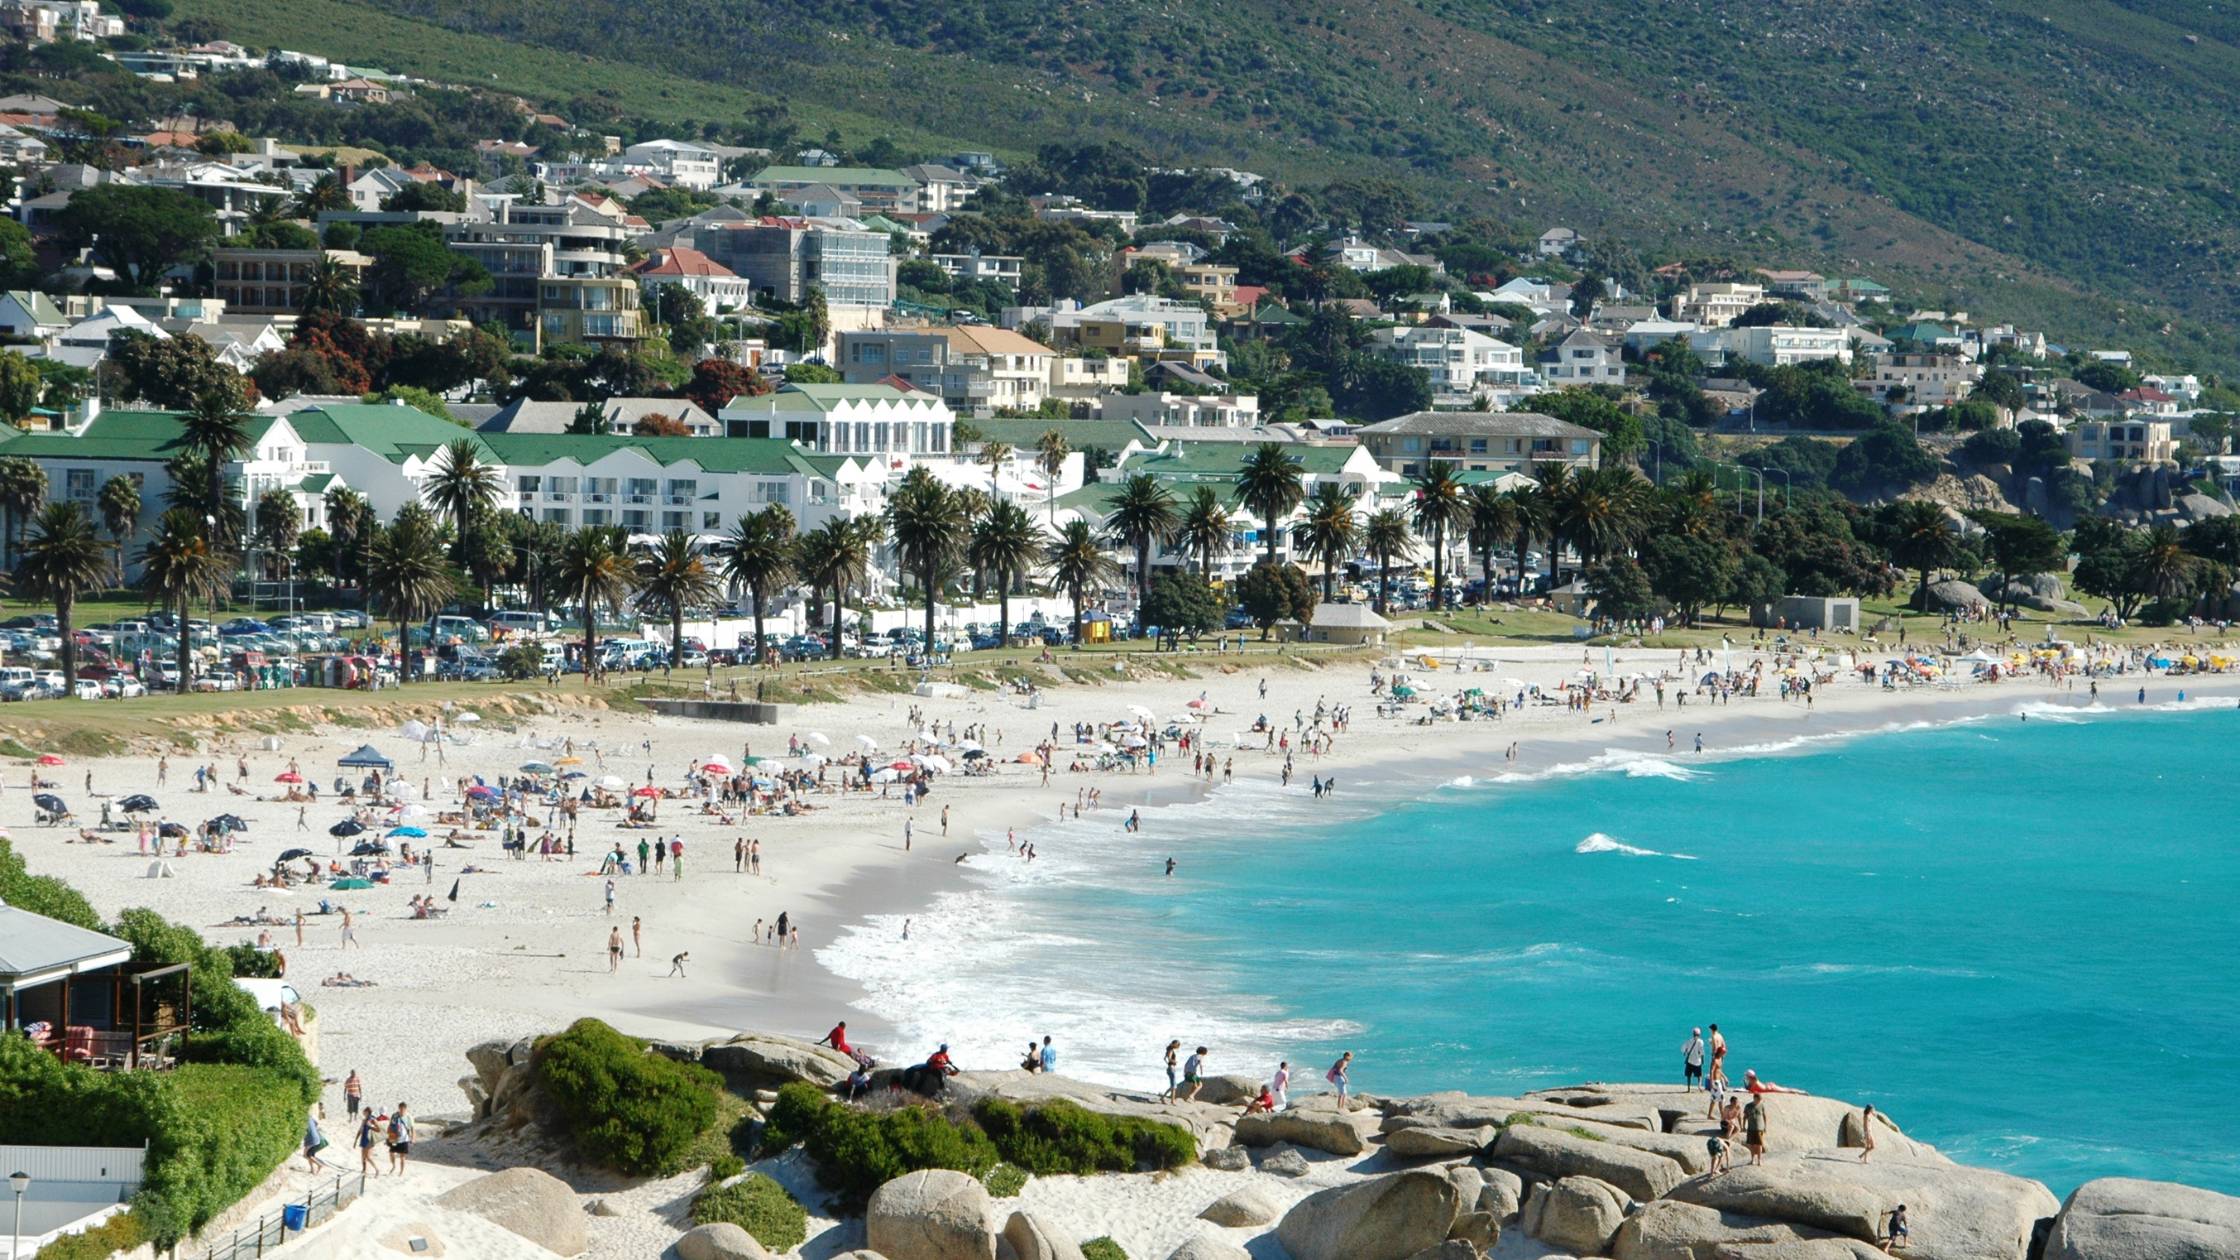 A panoramic view of Camps Bay Beach in Cape Town, South Africa.